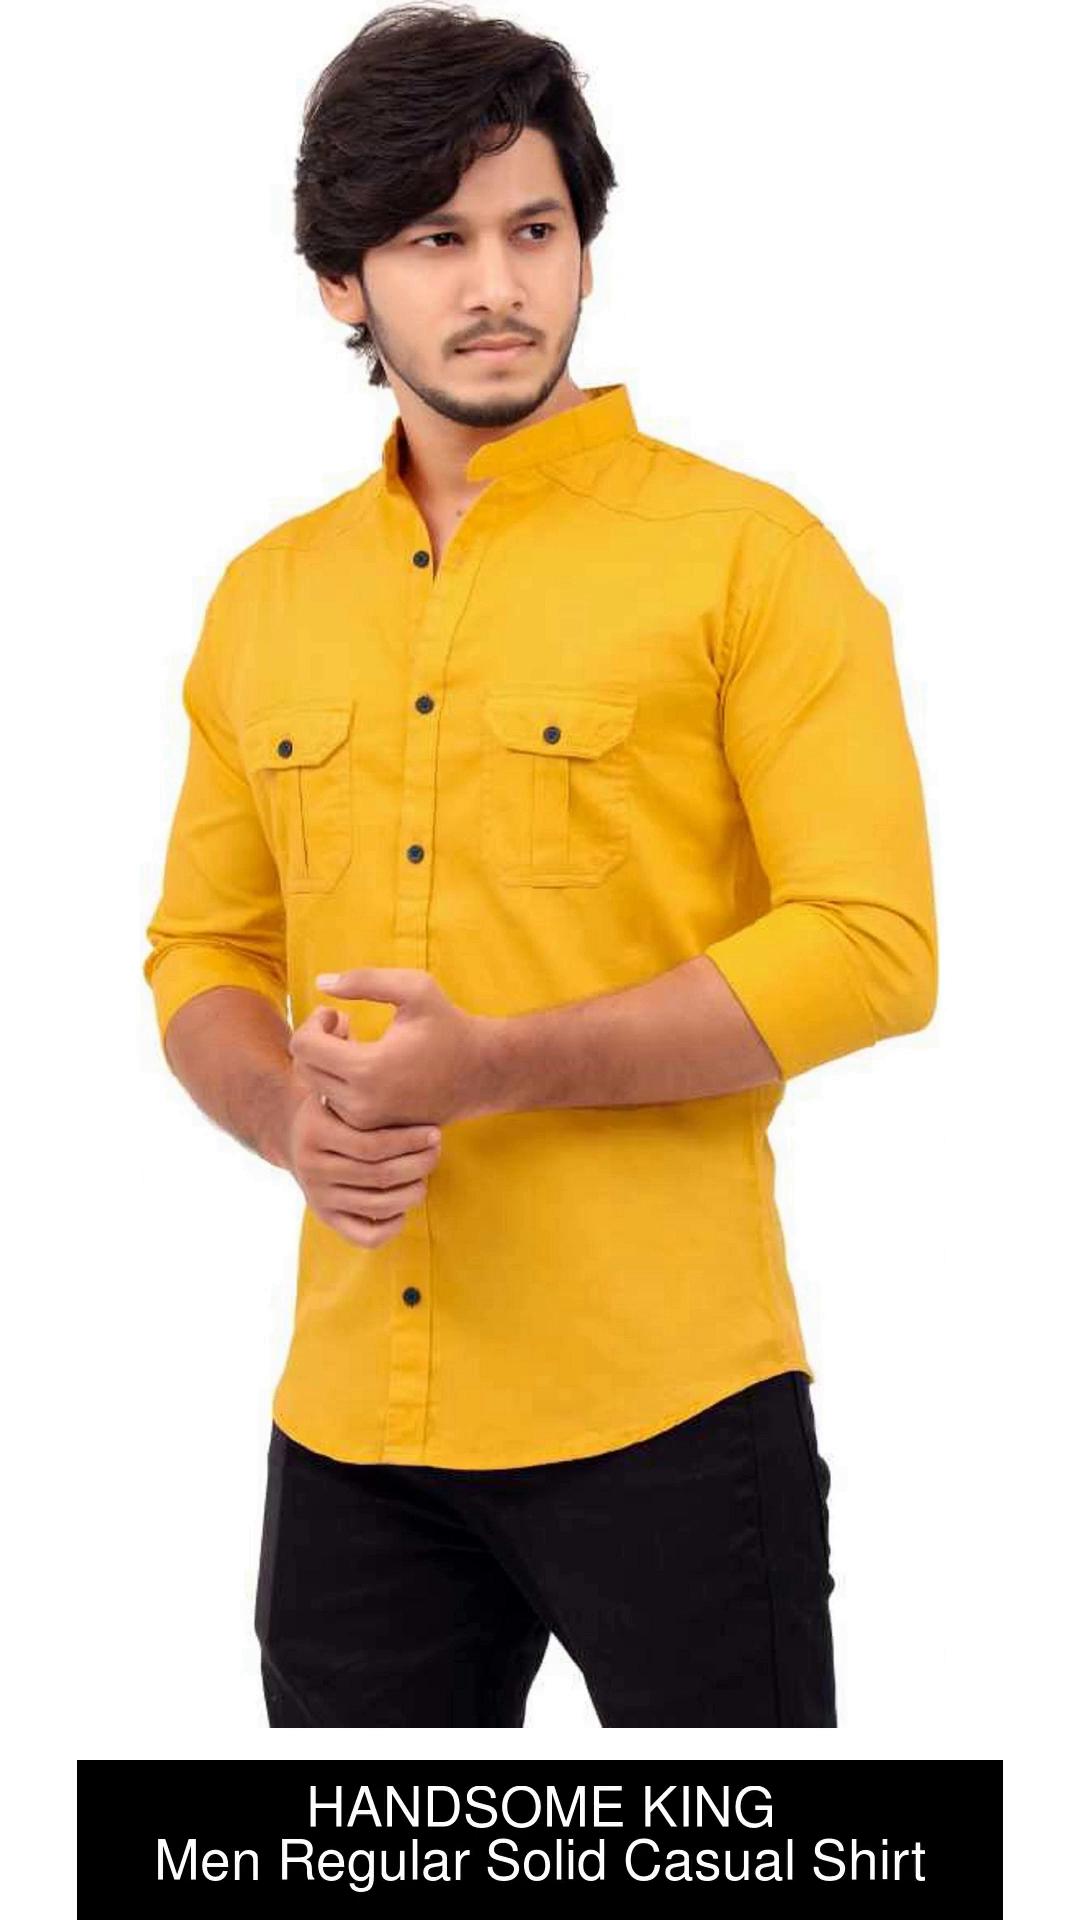 HANDSOME KING Men Solid Casual Yellow Shirt - Buy HANDSOME KING